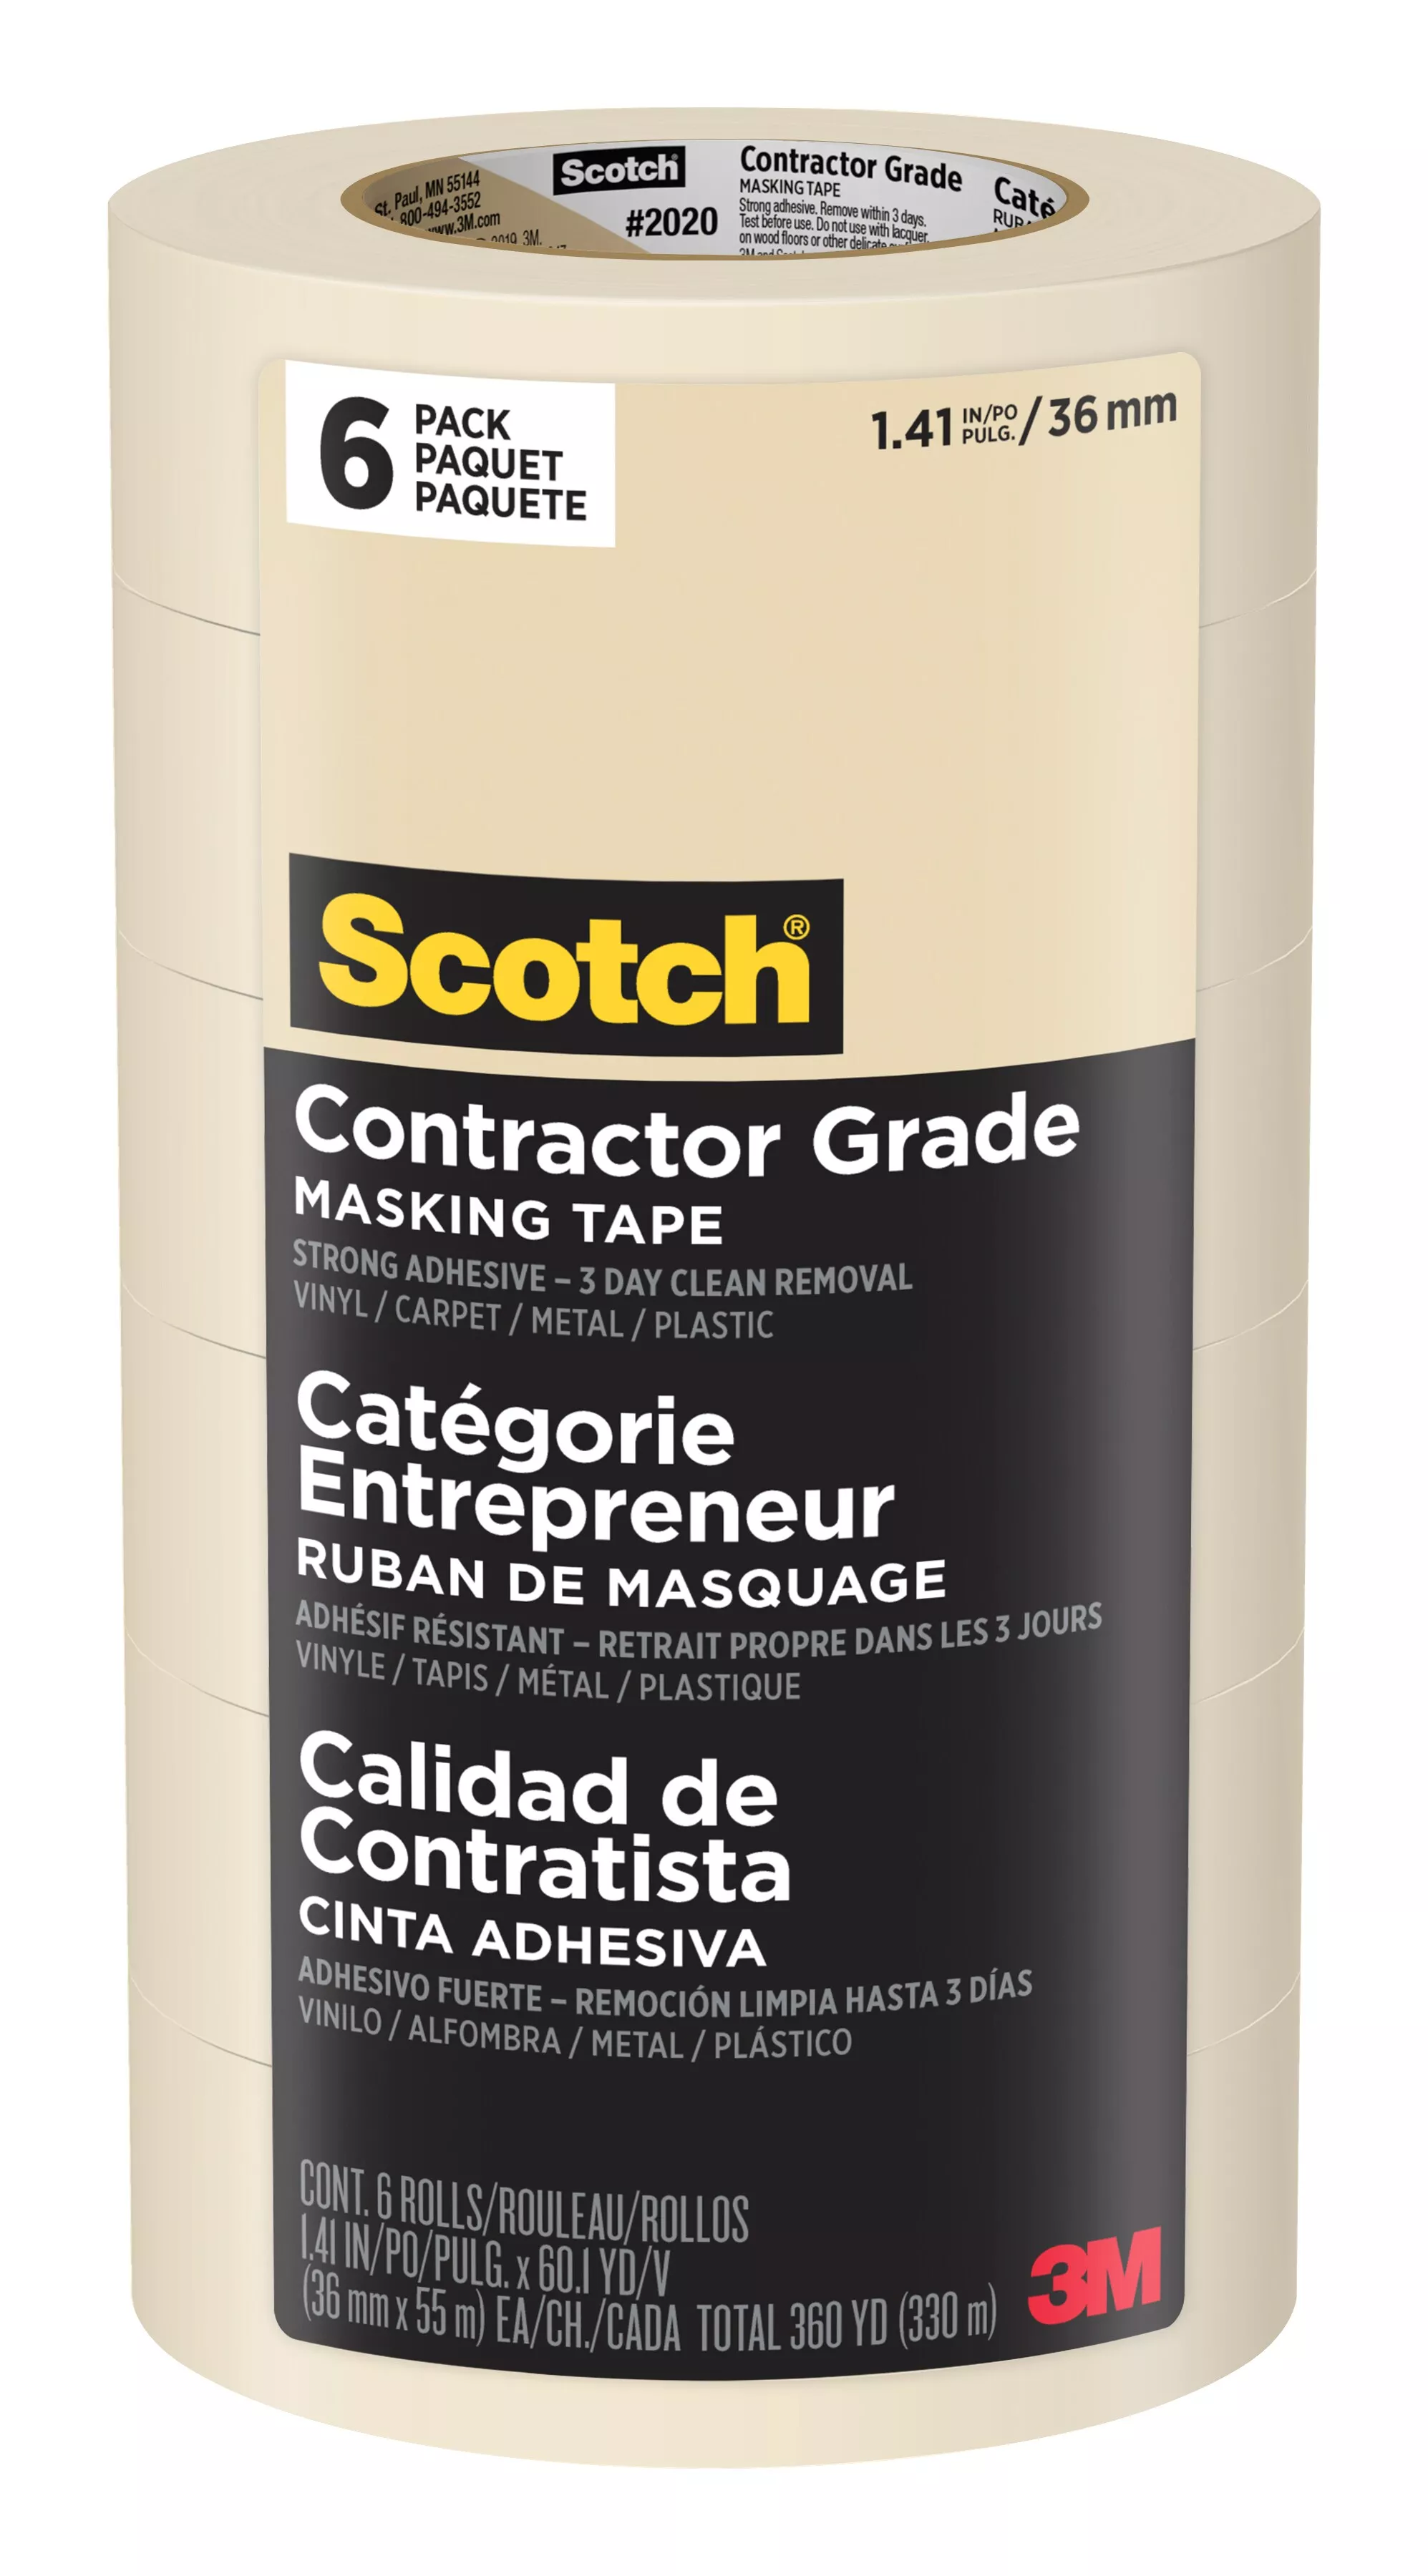 Scotch® Contractor Grade Masking Tape 2020-36AP6, 1.41 in x 60.1 yd (36mm x 55m), 6 rolls/pack